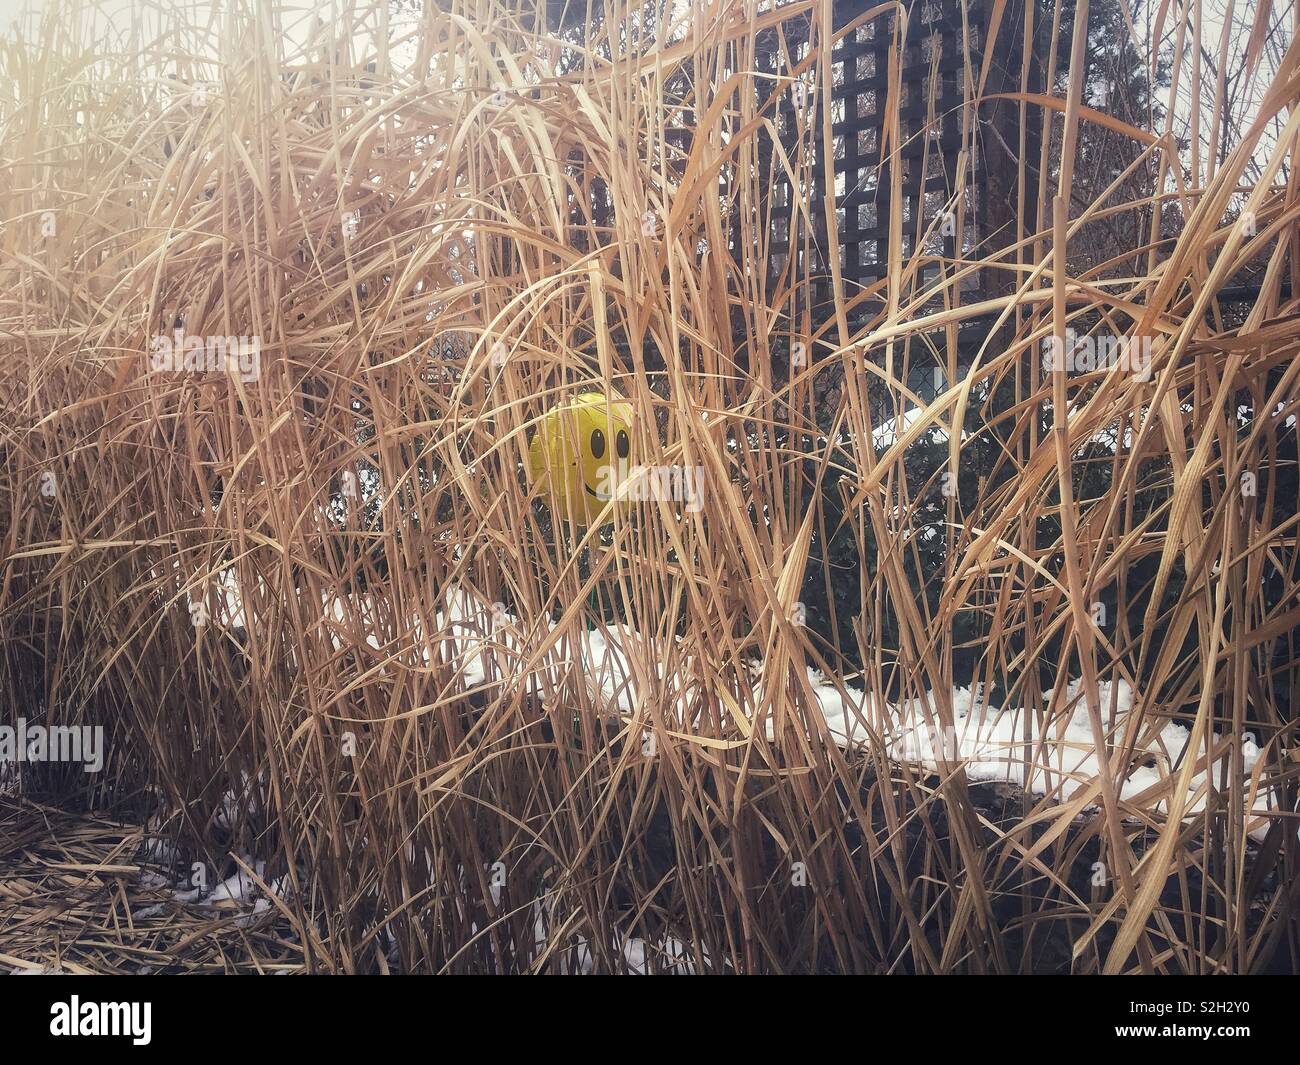 Smiley face balloon peaking through dried up tall bamboo grasses in a winter backyard. Stock Photo